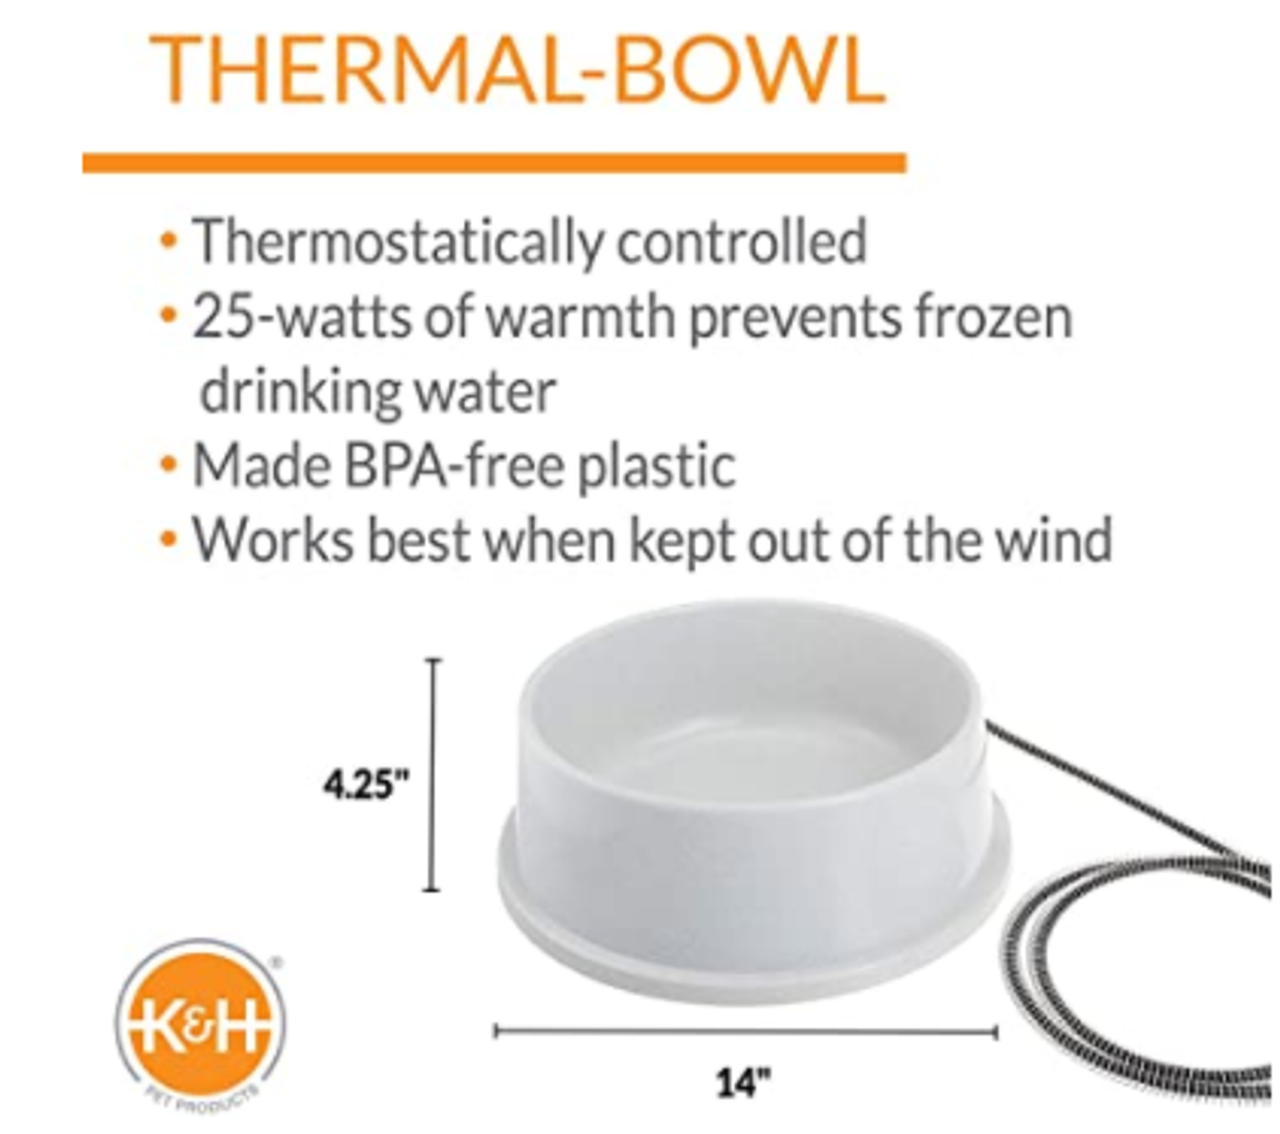 Stainless Steel 5 Quart Heated Pet Bowl